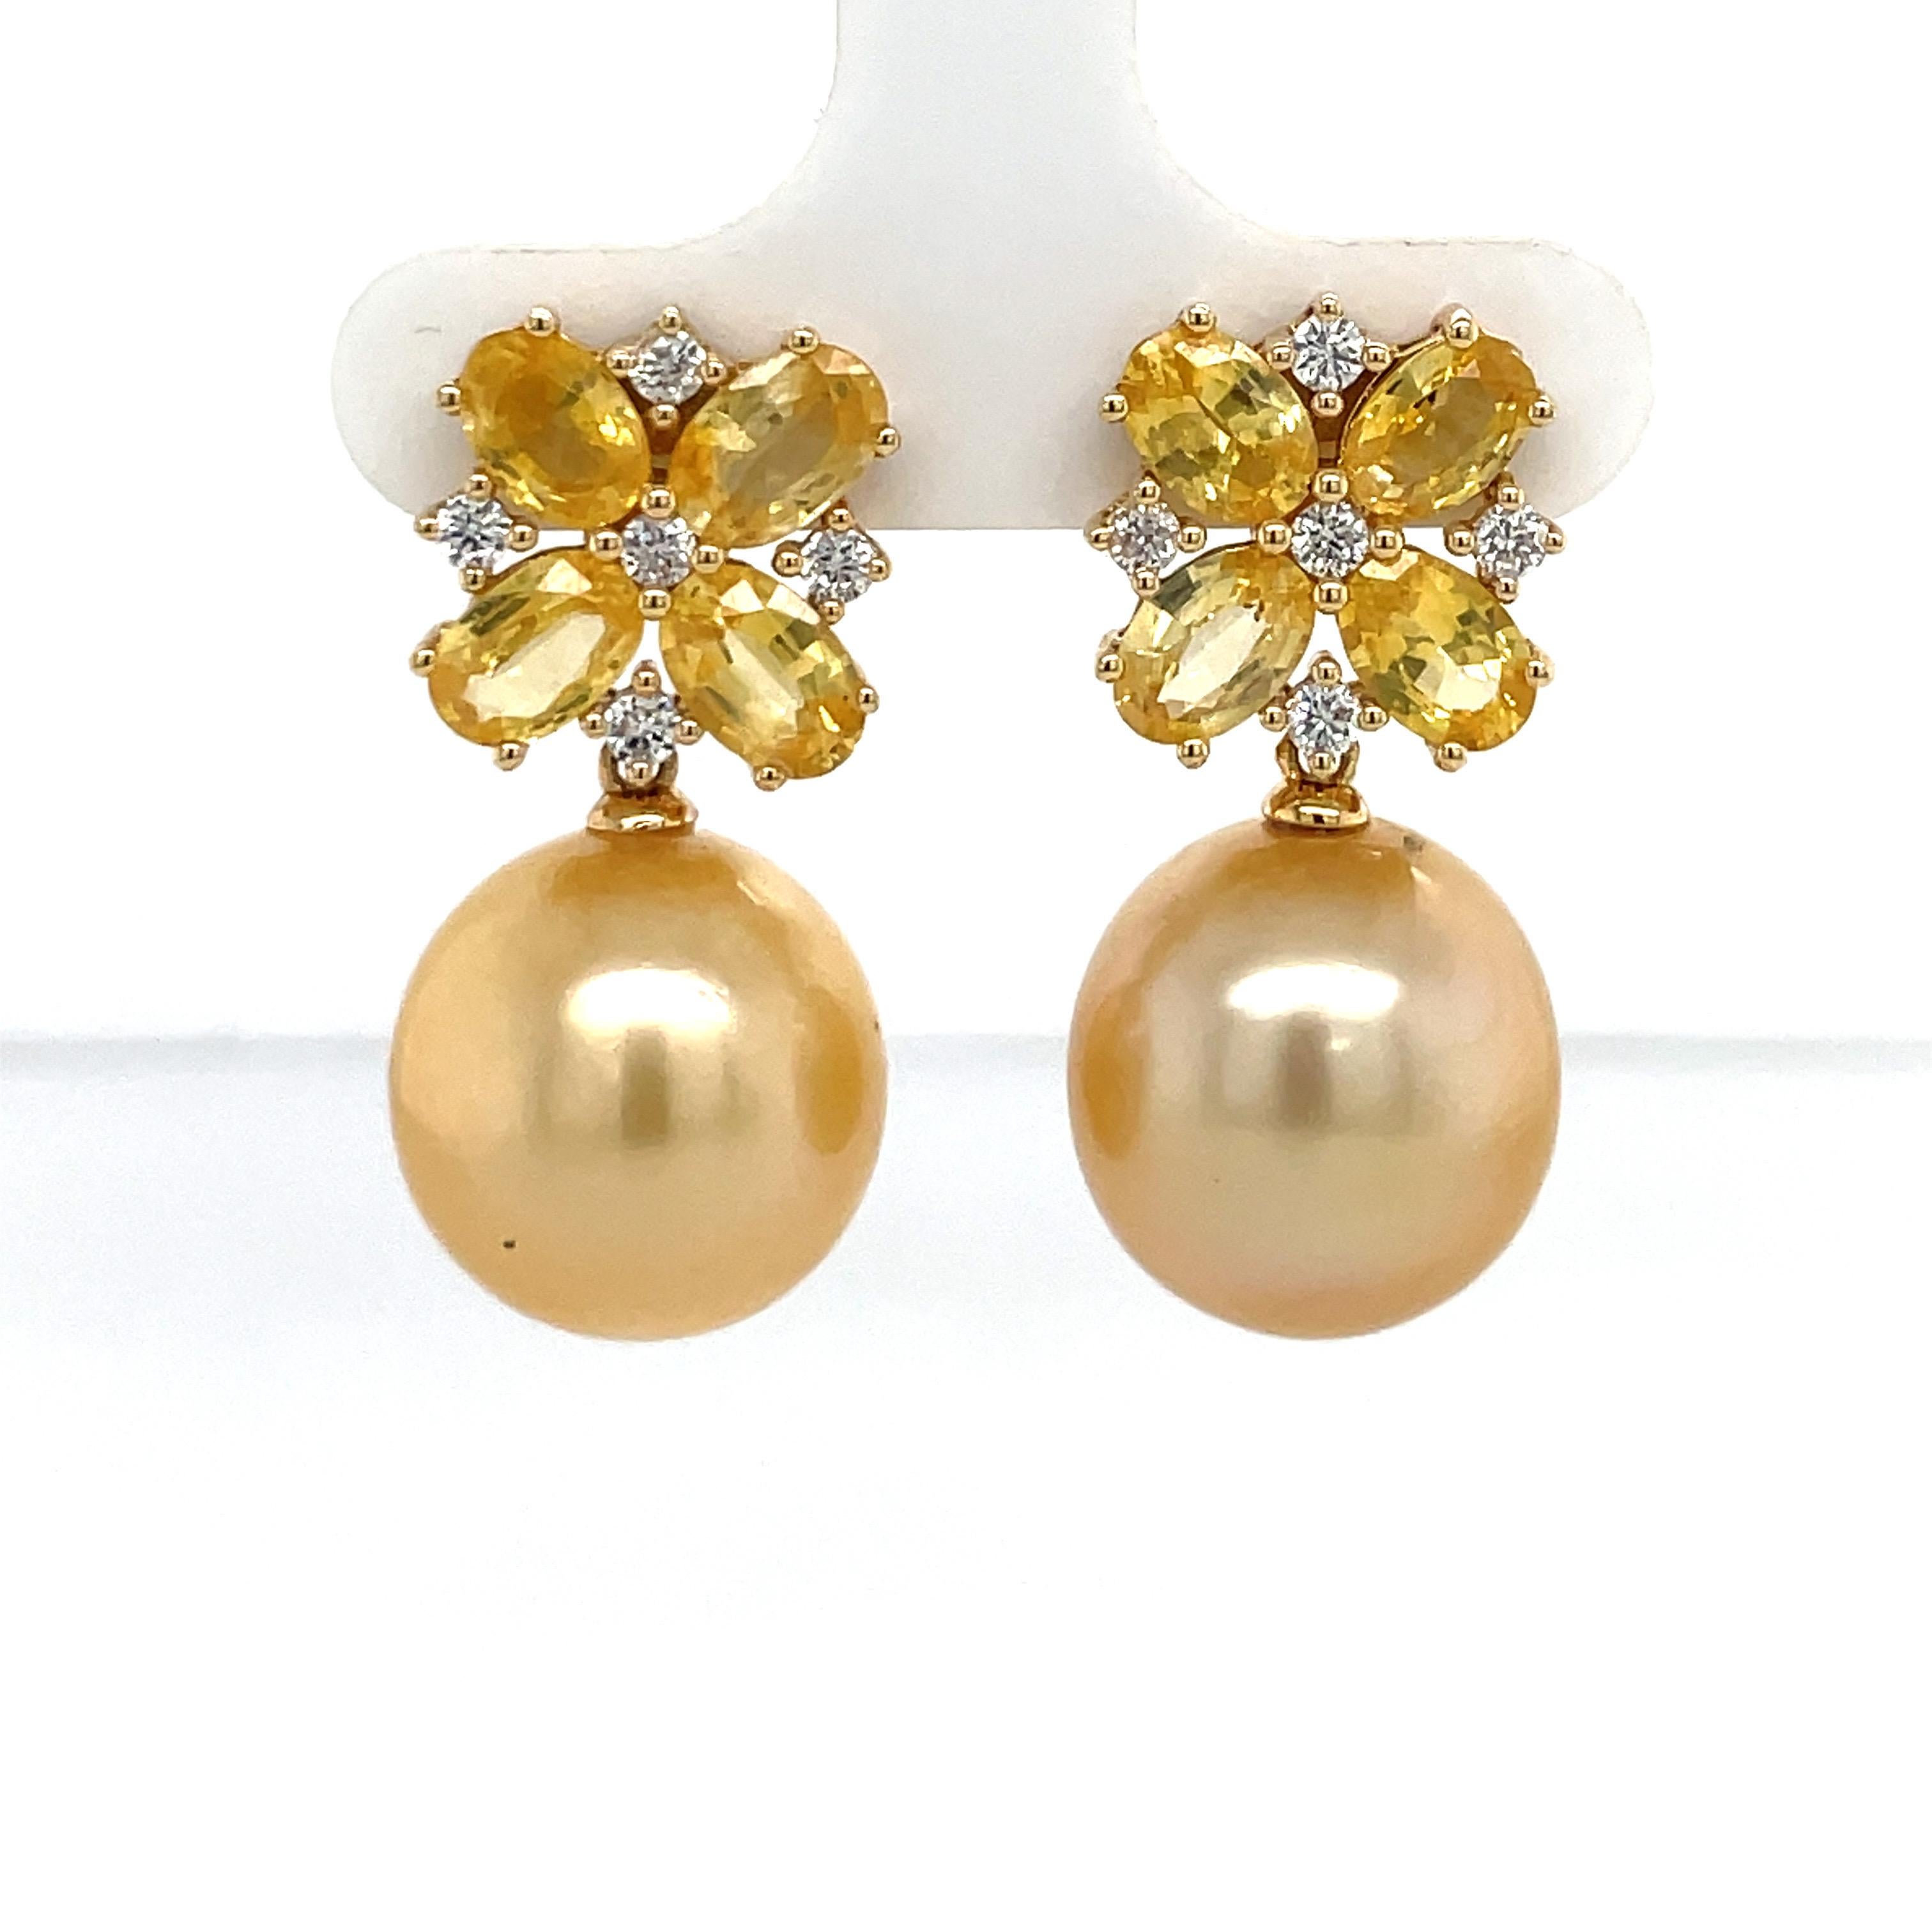 18 Karat Yellow Gold drop earrings featuring 8 Oval shape Sapphires weighing 4.68 Carats with 10 diamonds, 0.34 Carats, and two Golden South Sea Pearls measuring 13-14 MM. 
Can customize Pearl color & size.
DM for more information. 